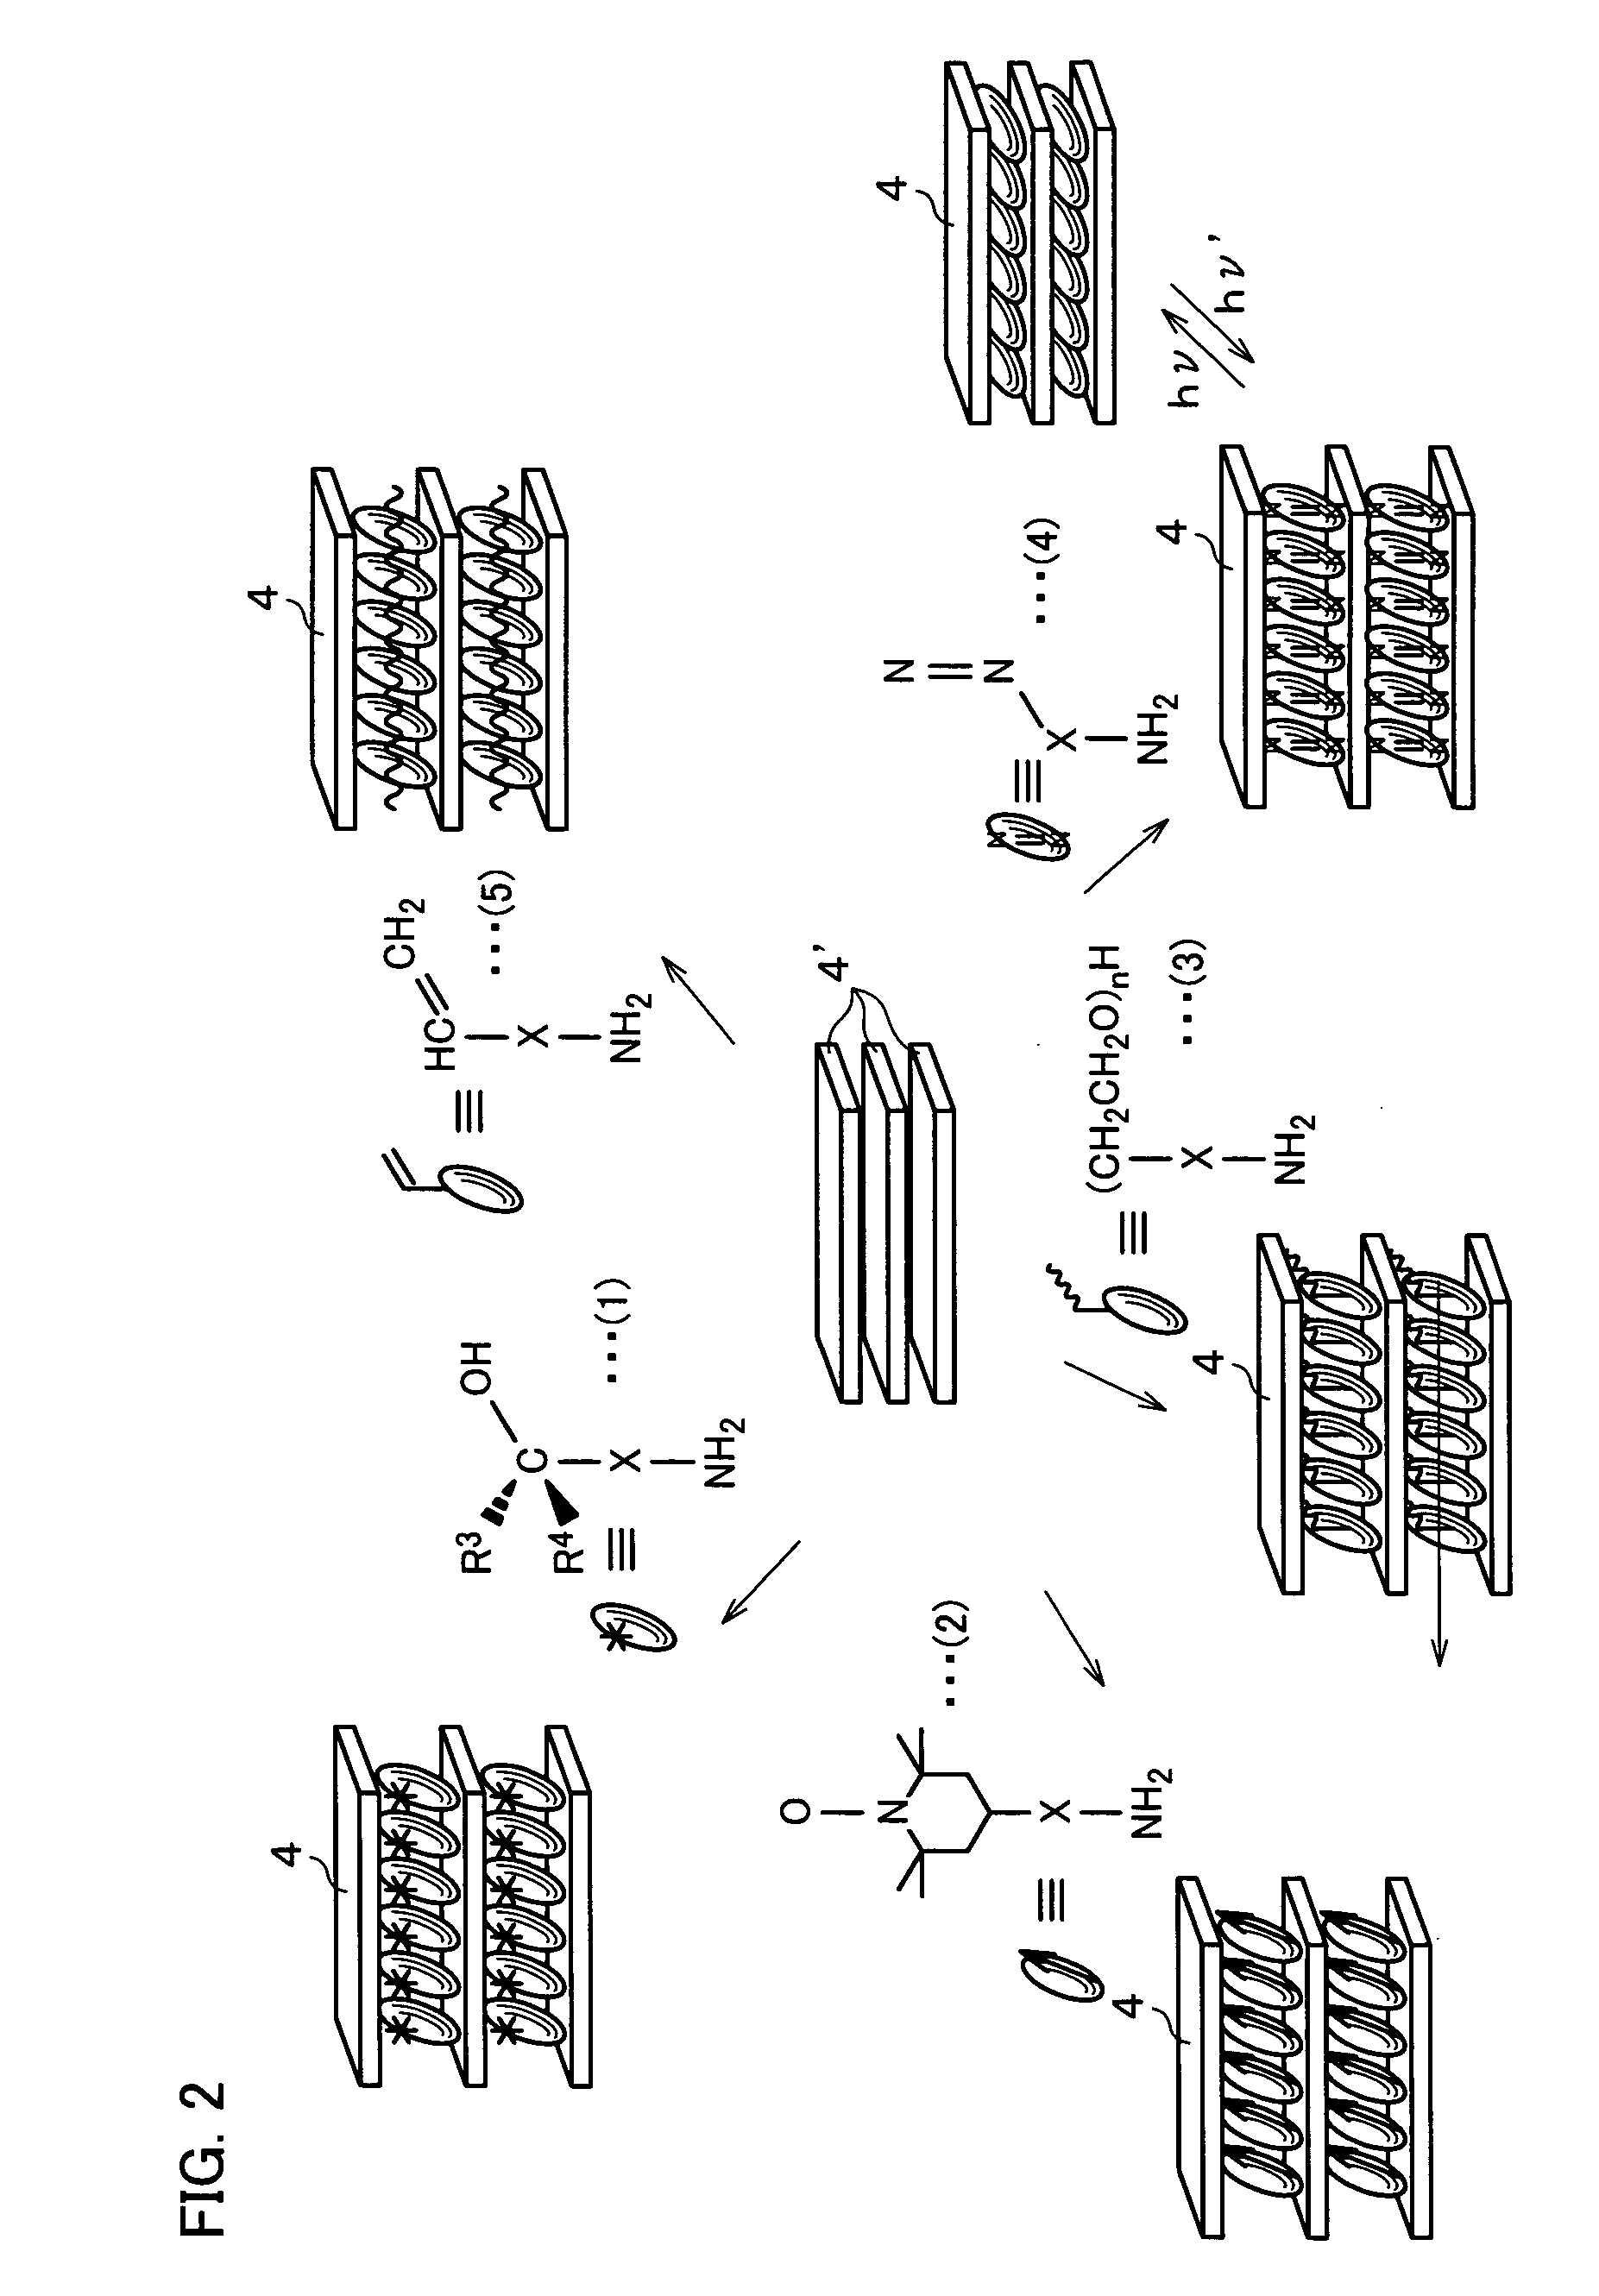 Photoresponsive polymer, built-up type diacetylene polymer, crystals of ammonium carboxylates, and processes for production of them